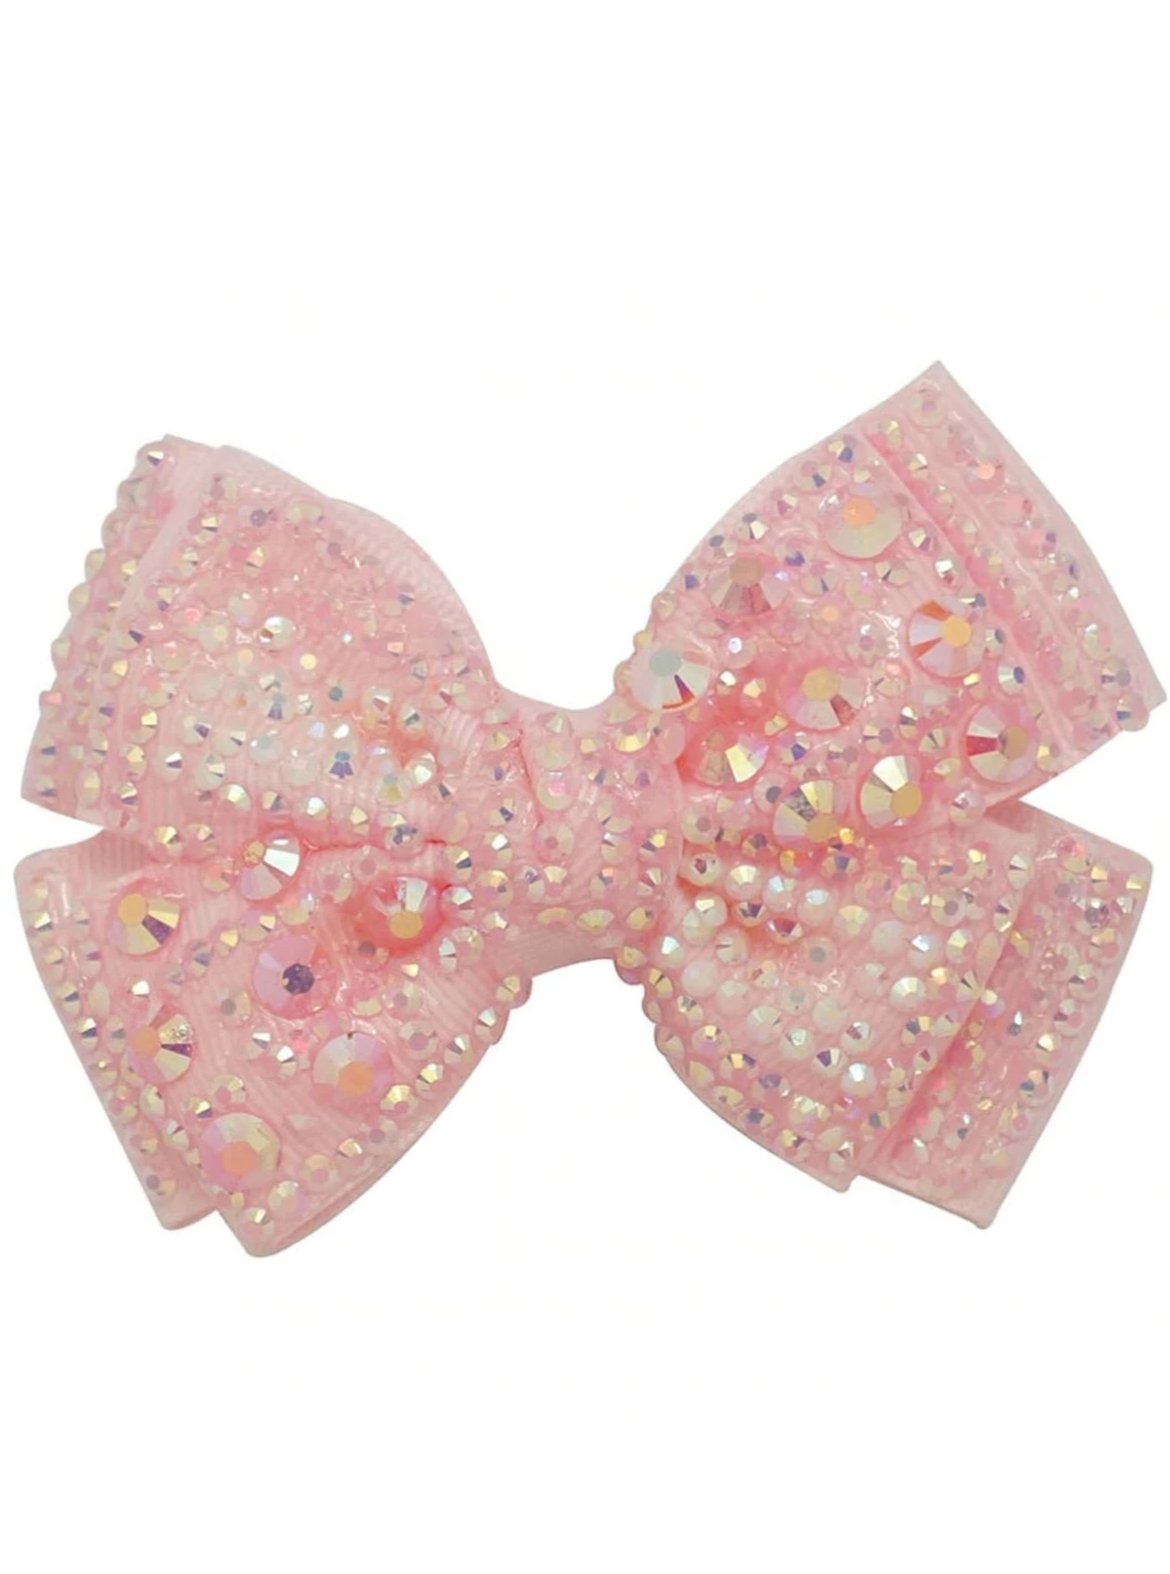 Girls Crystal Rhinestone Embellished Bow Hair Clips - Pink - Hair Accessories